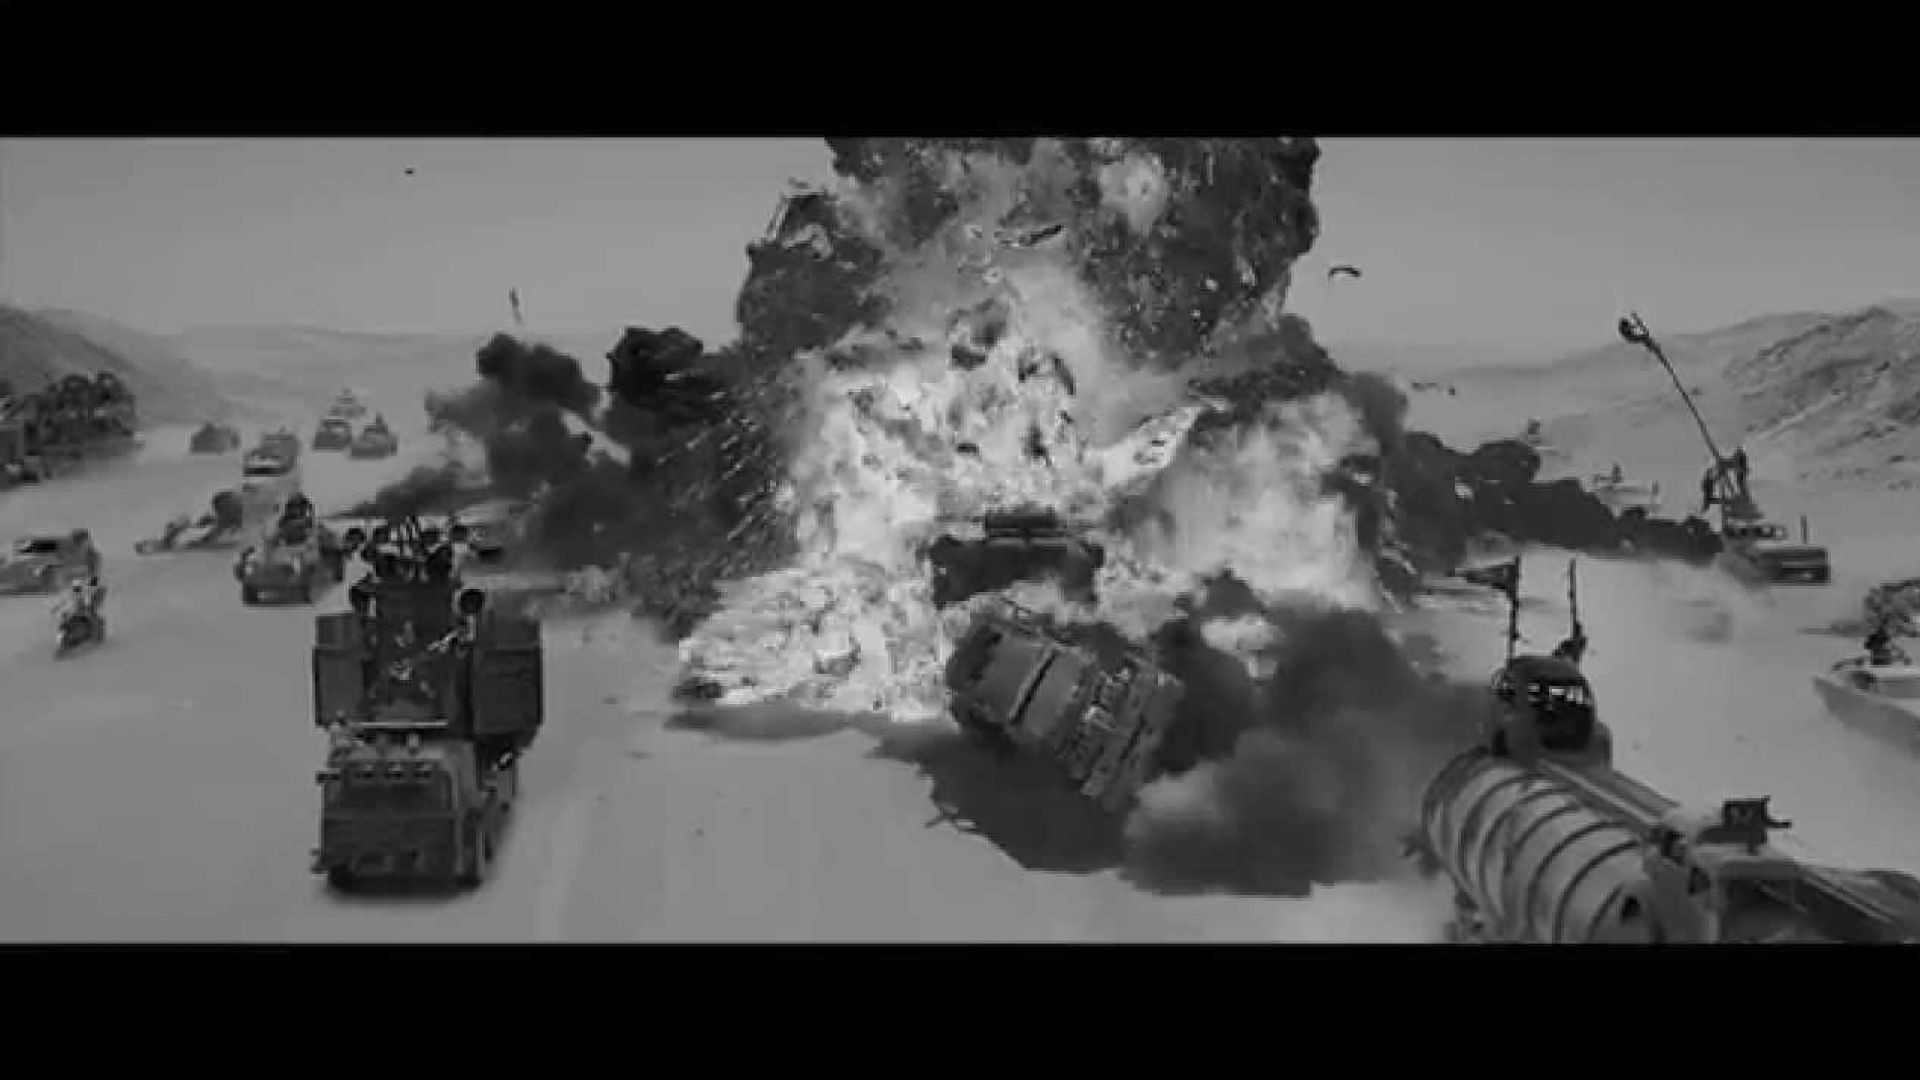 Black and White Mad Max: Fury Road trailer